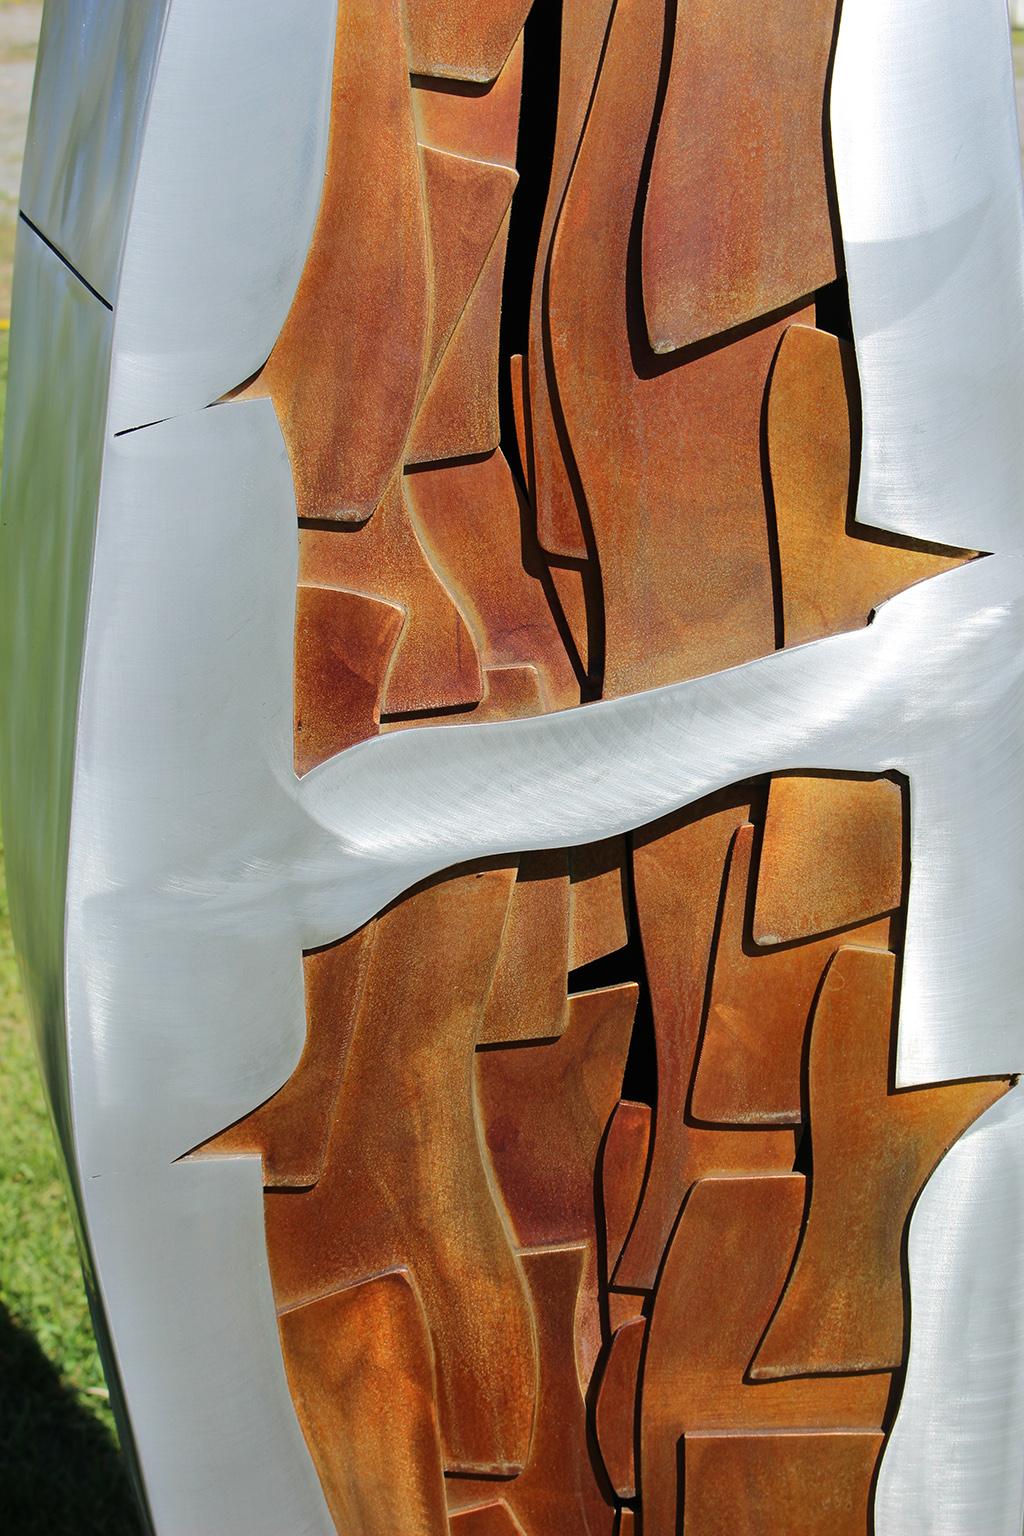 Two narrow leaf shapes rise from the ground and reach for the sky in this finely crafted aluminum sculpture by Stephane Langlois. The pieces sit about two feet apart and measure:  92 x 16 x 13 inches (110 lbs); and 106 x 17 x 19 inches (125 lbs).